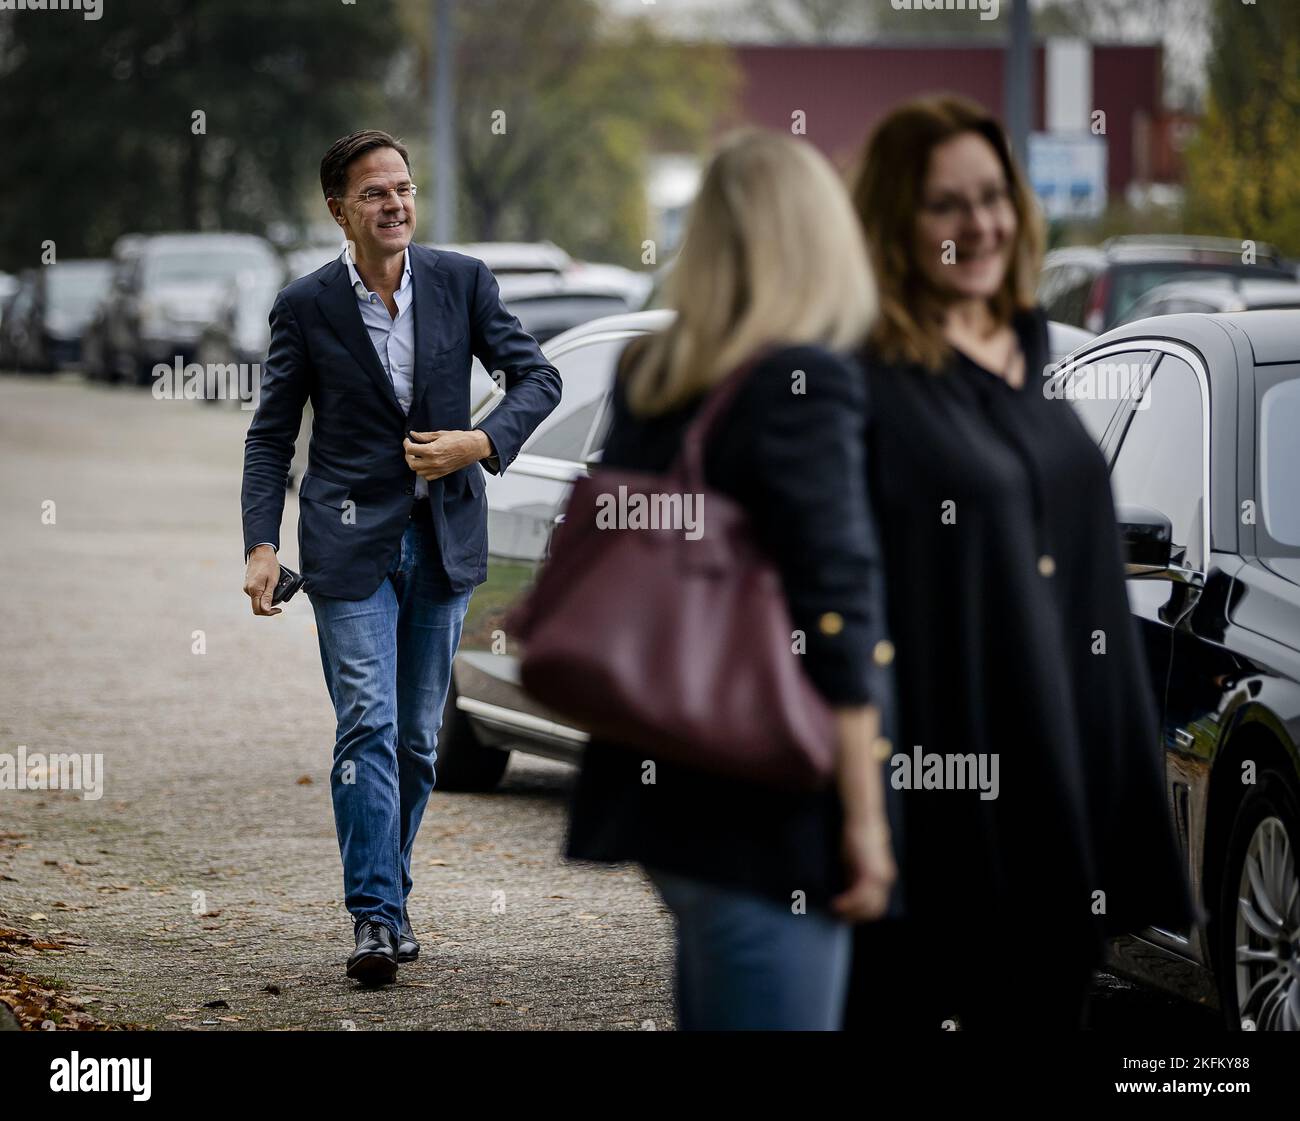 ROTTERDAM - Mark Rutte (VVD) arrives at the Van Nelle Factory prior to the autumn congress of the VVD. ANP REMKO DE WAAL netherlands out - belgium out Stock Photo